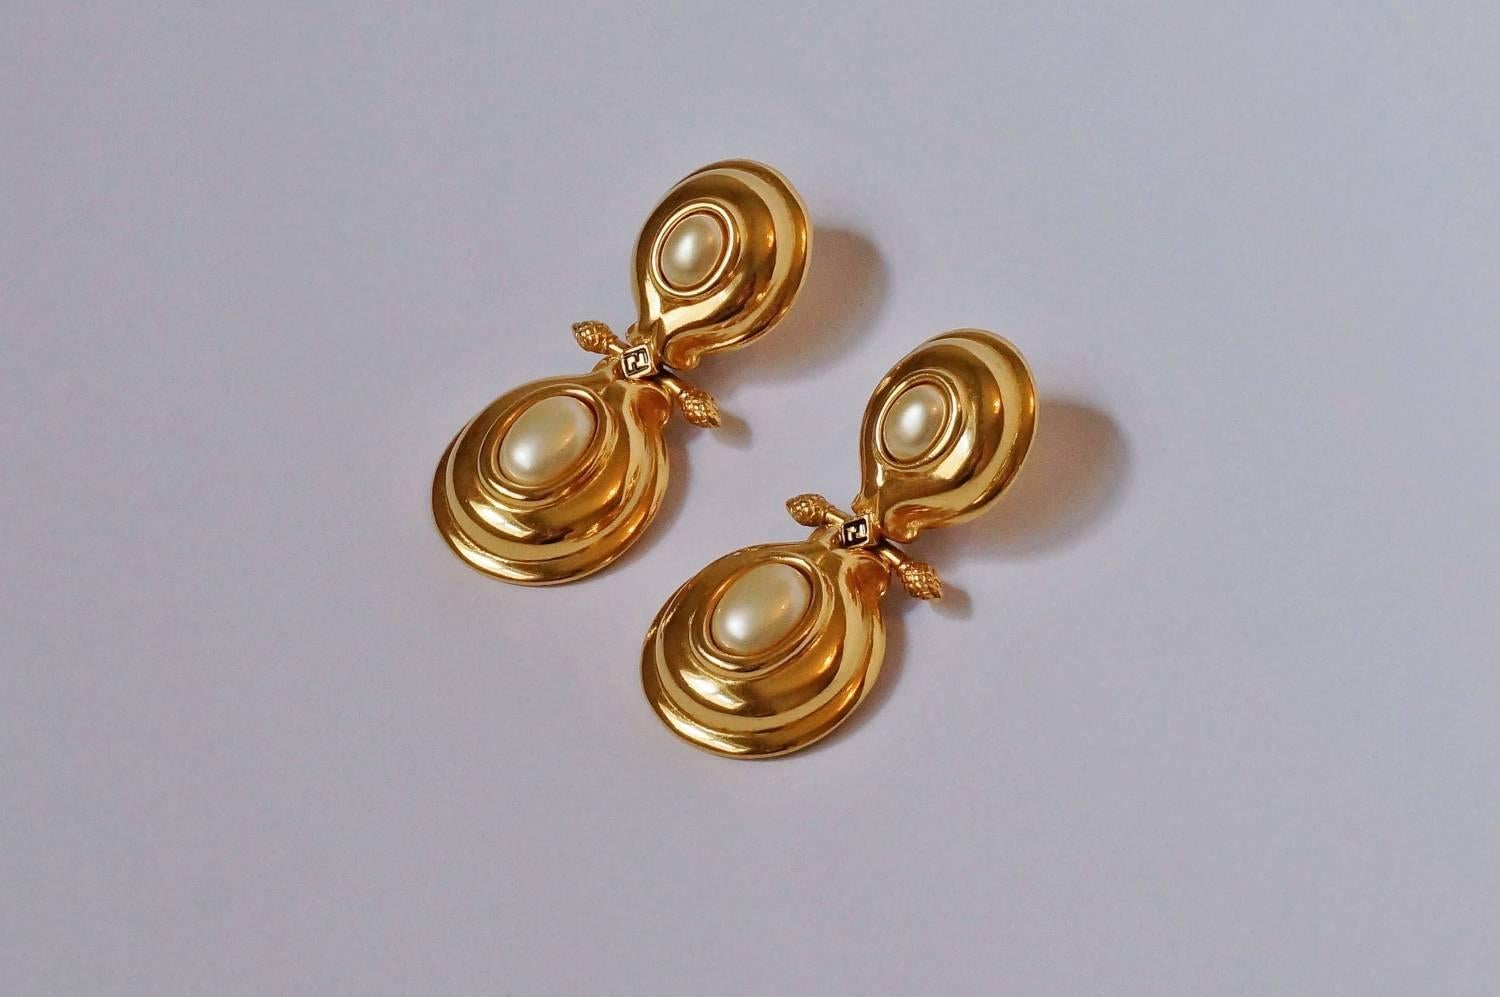 Fendi earrings, faux pearl cabochons set in a gold plated gilt frame, triple signed, Karl Lagerfeld design, circa 1980s, Italian.

These earrings are likely designed by Karl Lagerfeld as they are from the period when he was involved in the Fendi